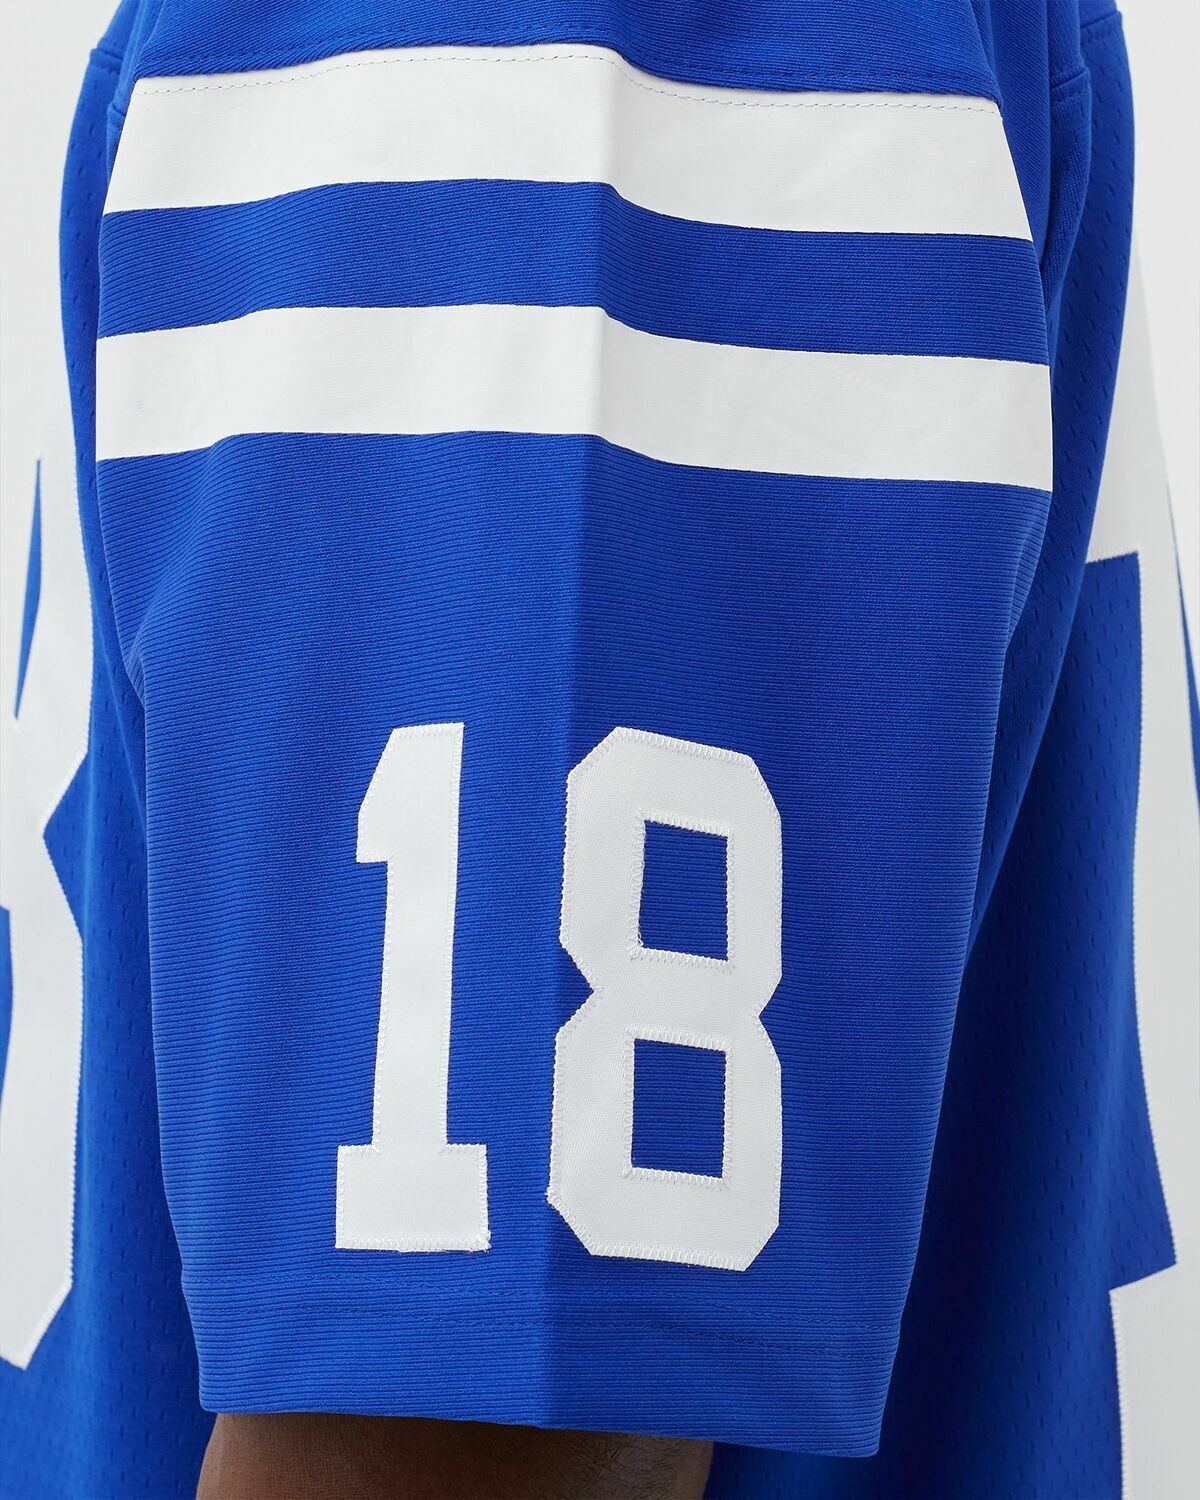 Mitchell & Ness Nfl Legacy Jersey Indianapolis Colts 1998 Peyton Manning #18 Blue - Mens - Jerseys